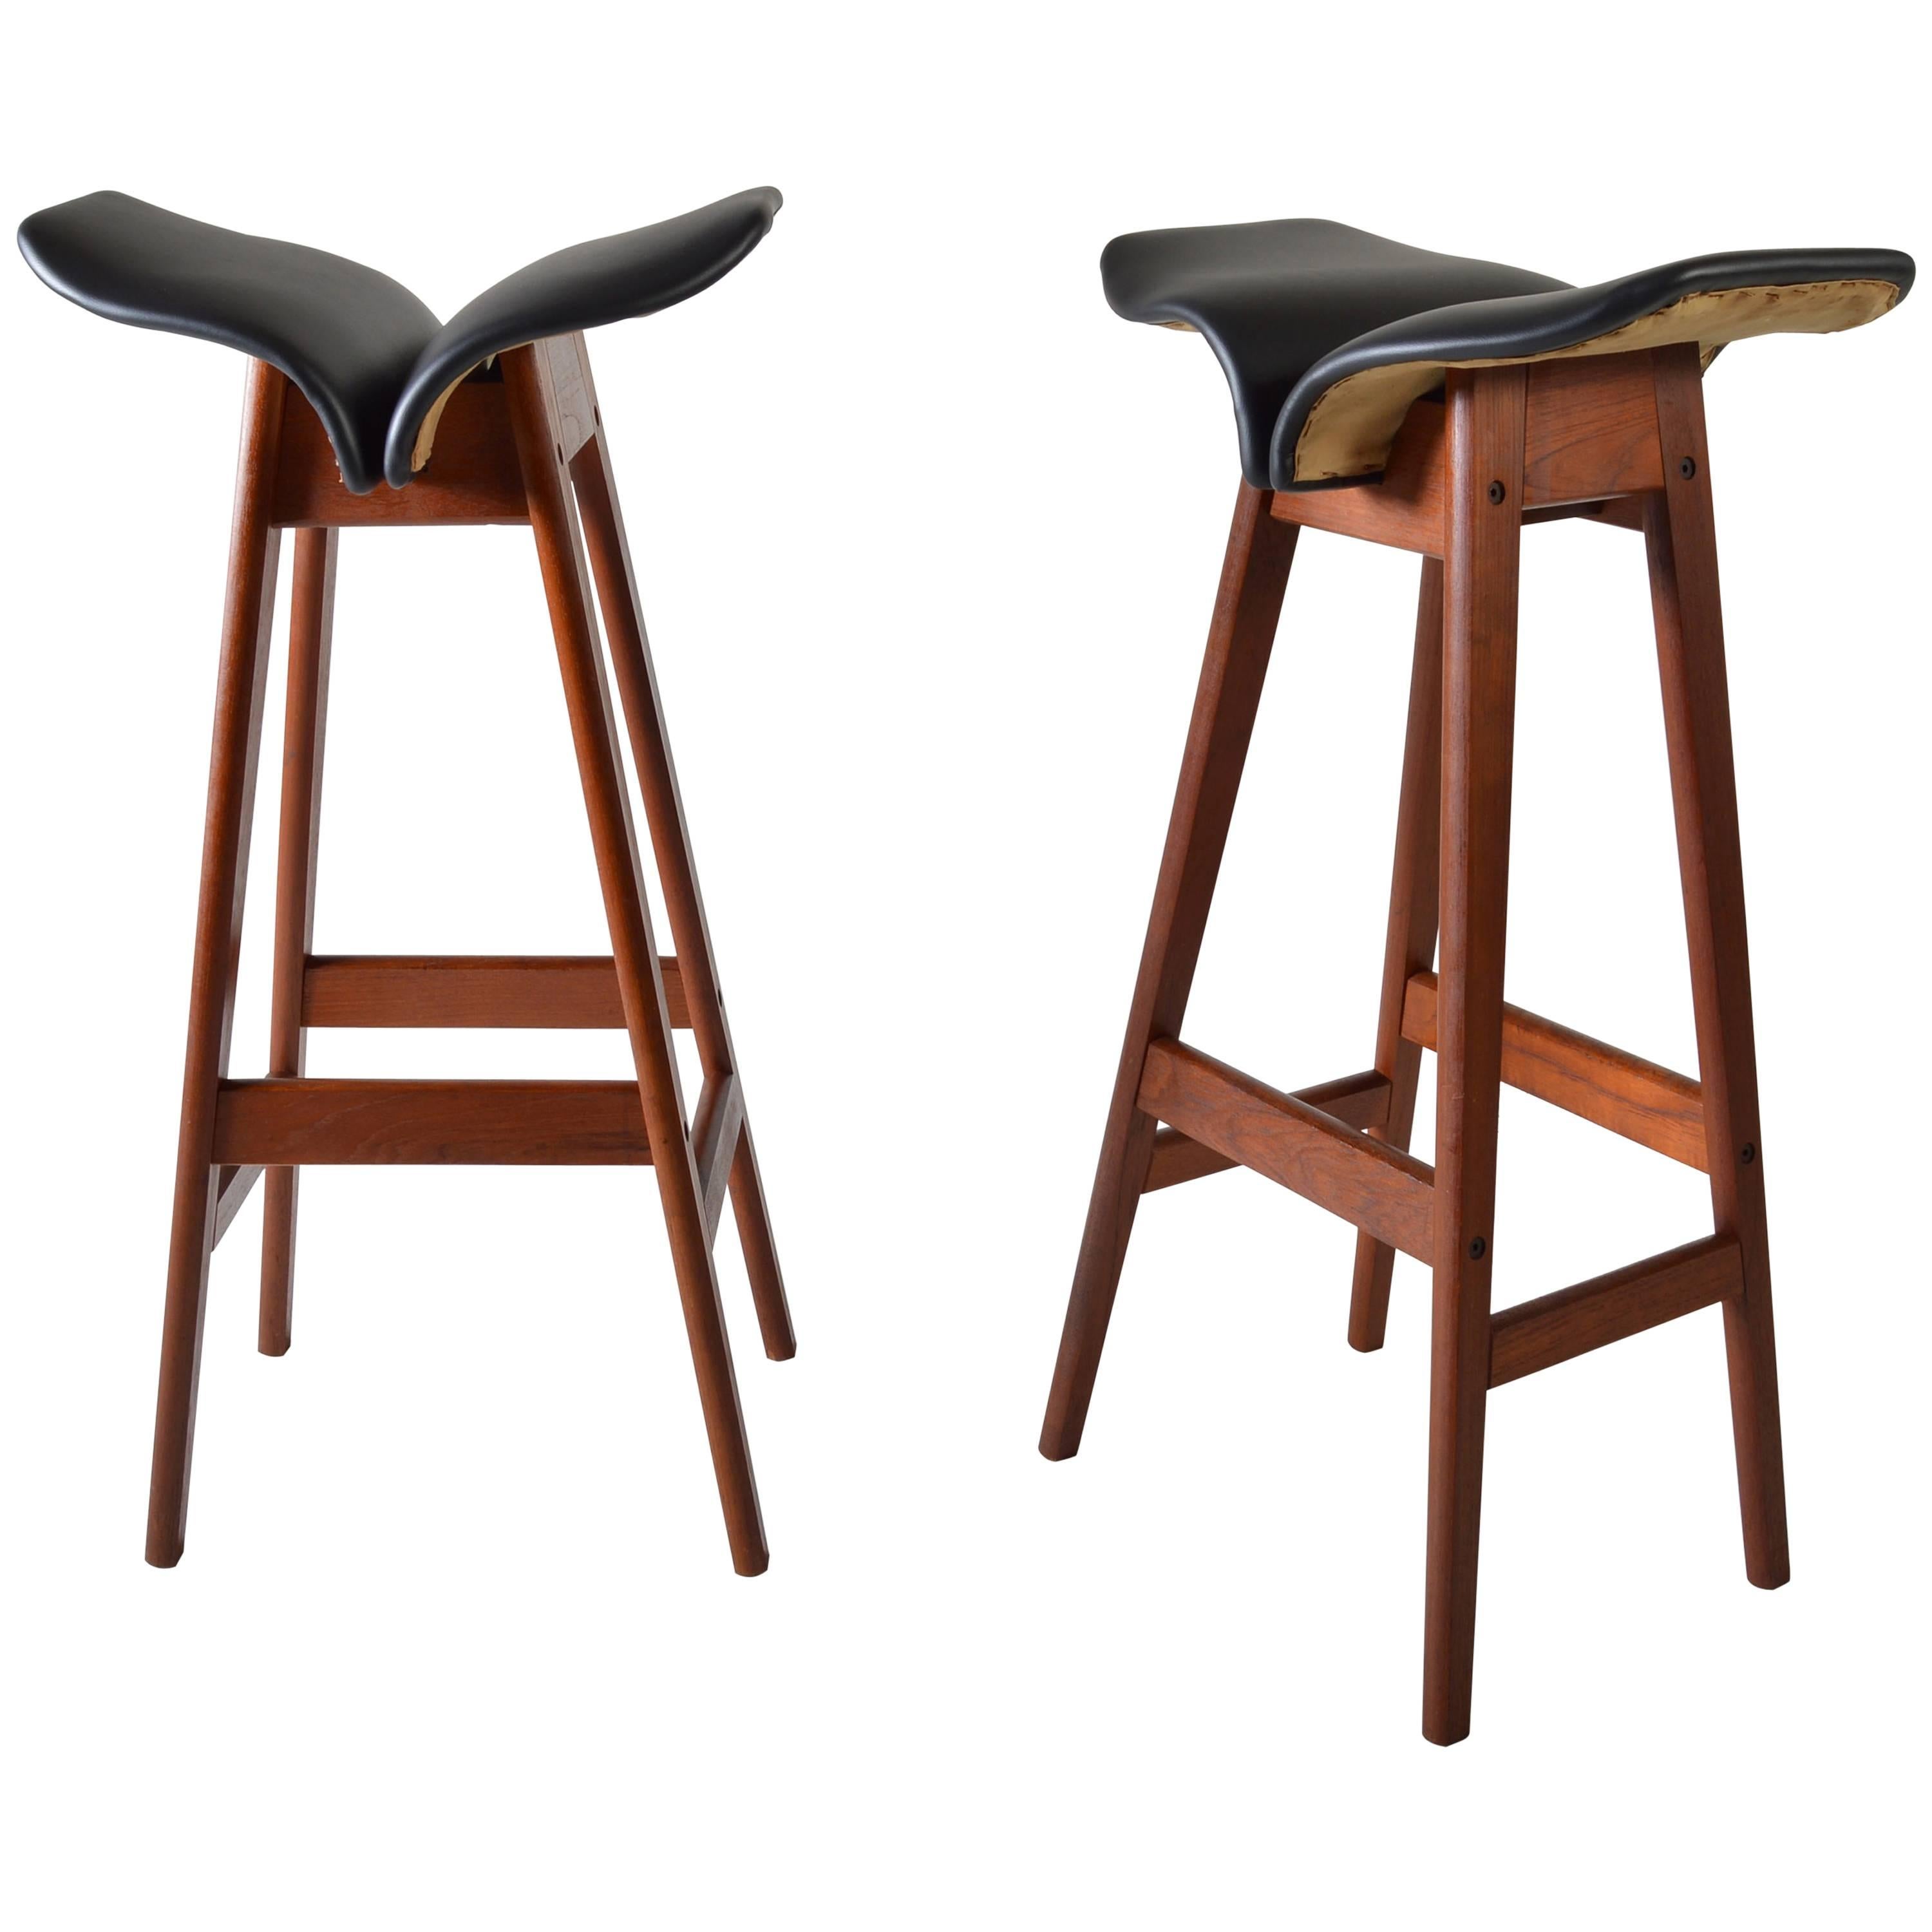 Pair of Rare, Early Teak Barstools Designed by Erik Buch